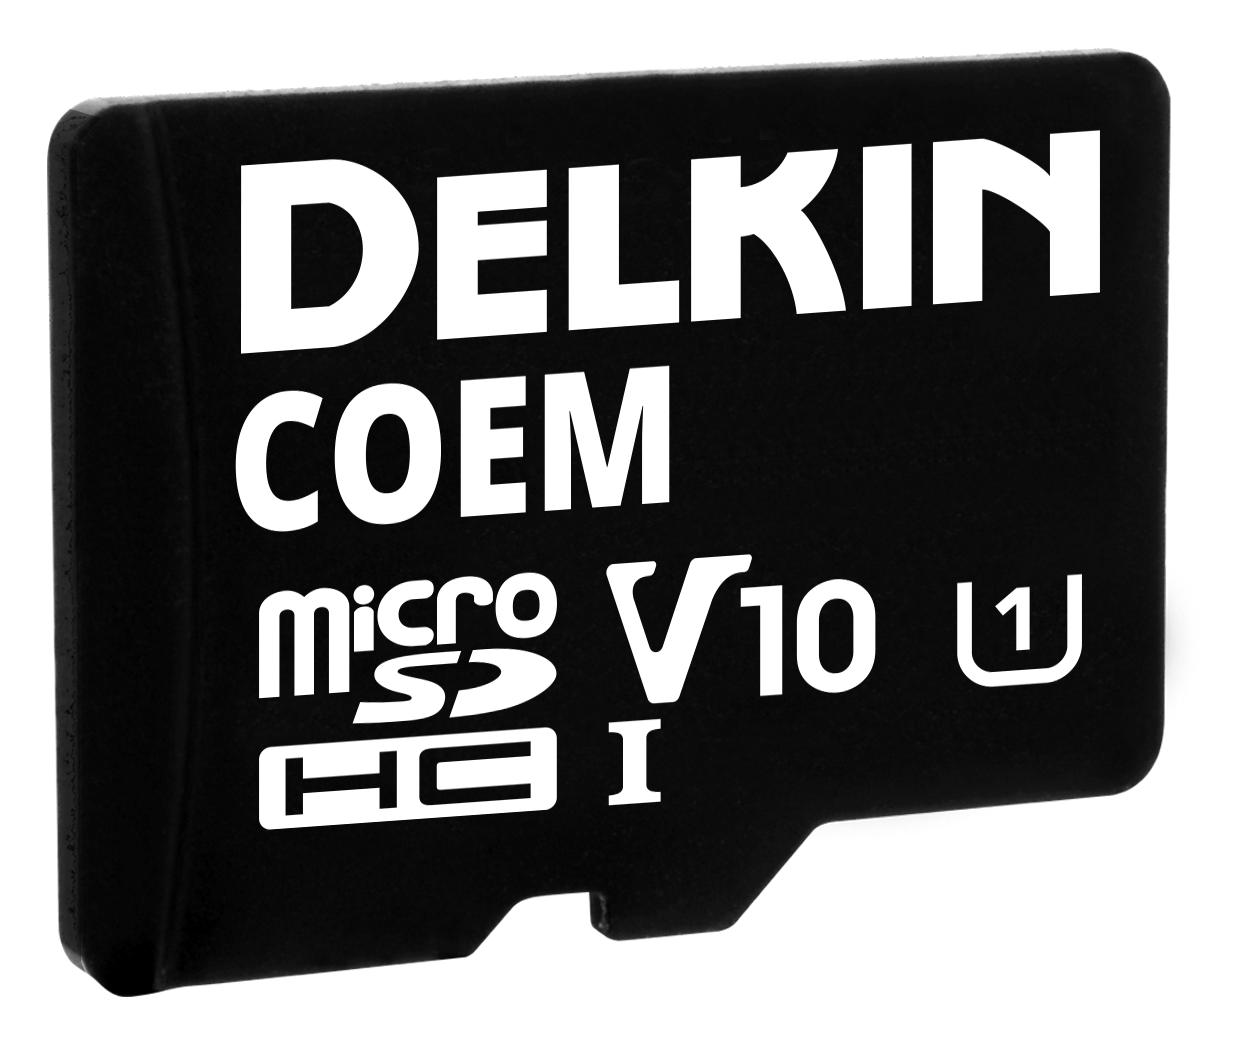 USDCOEM-32GB MEMORY CARD, MICRO SD, 32GB DELKIN DEVICES